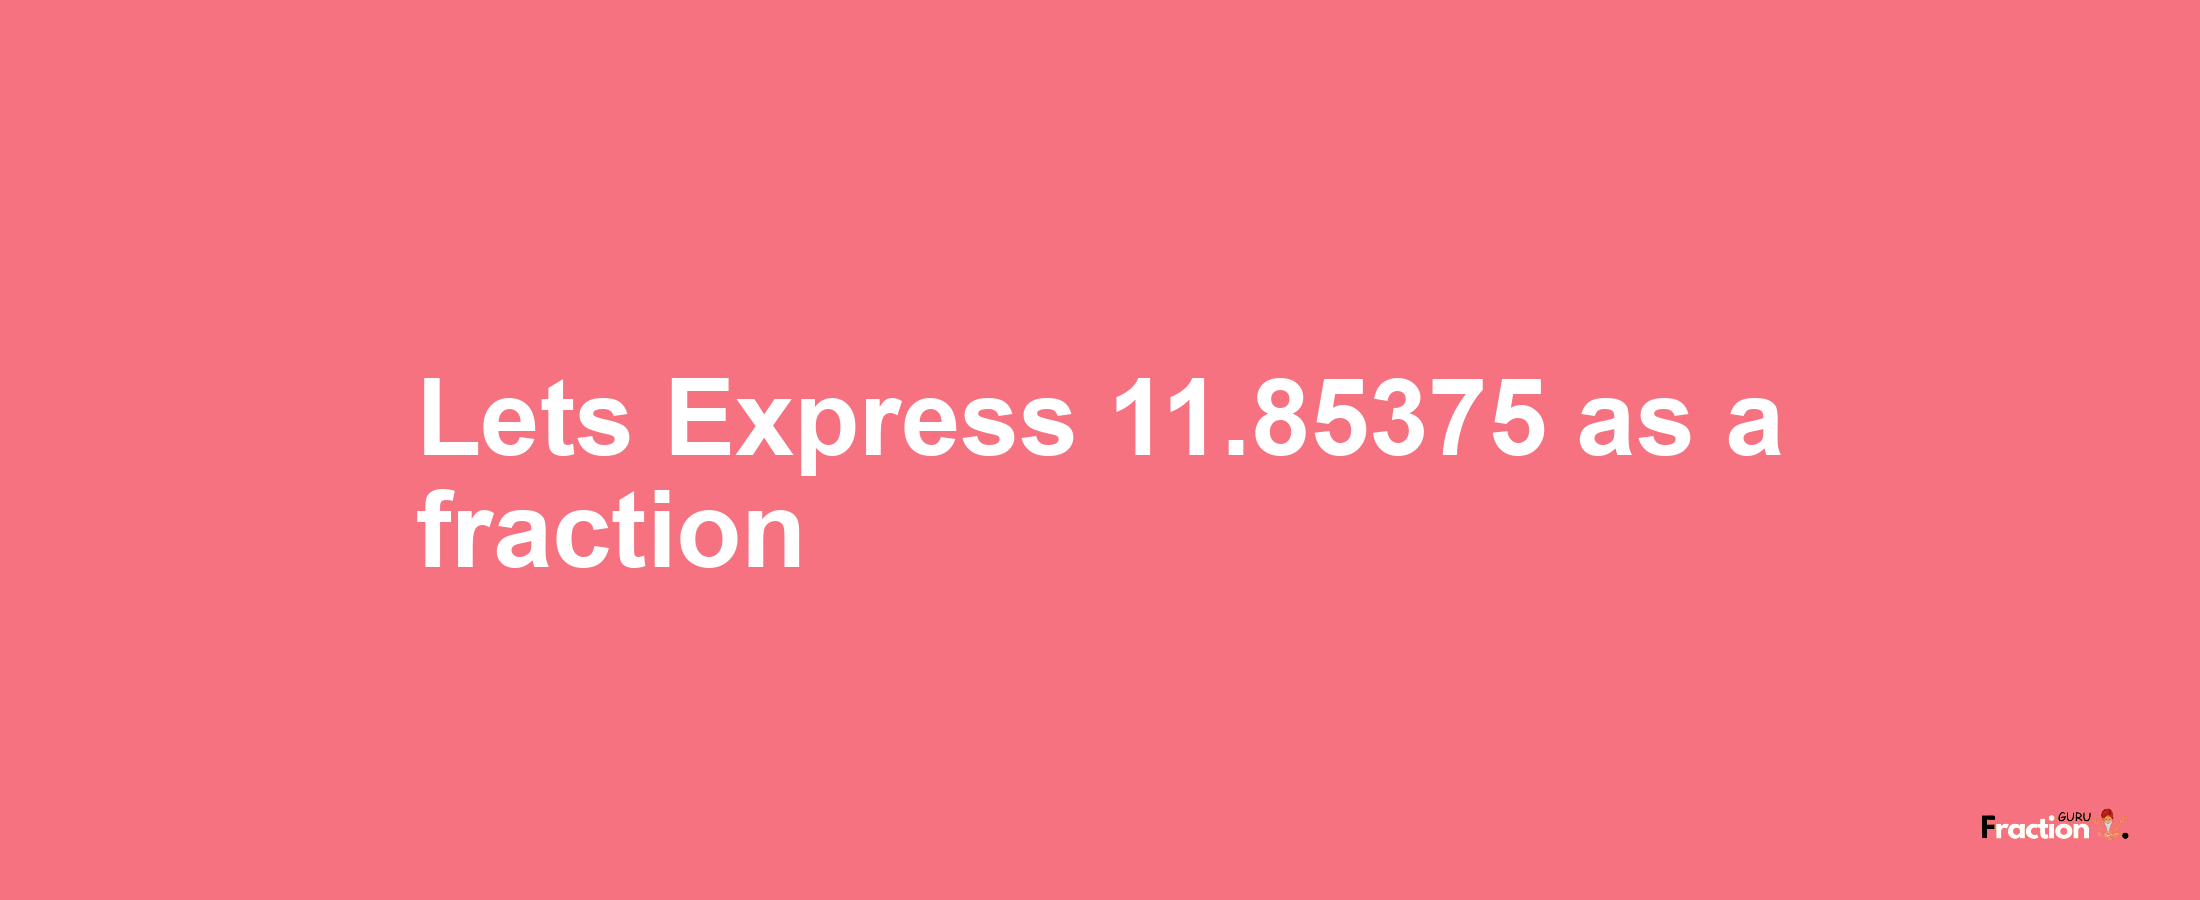 Lets Express 11.85375 as afraction